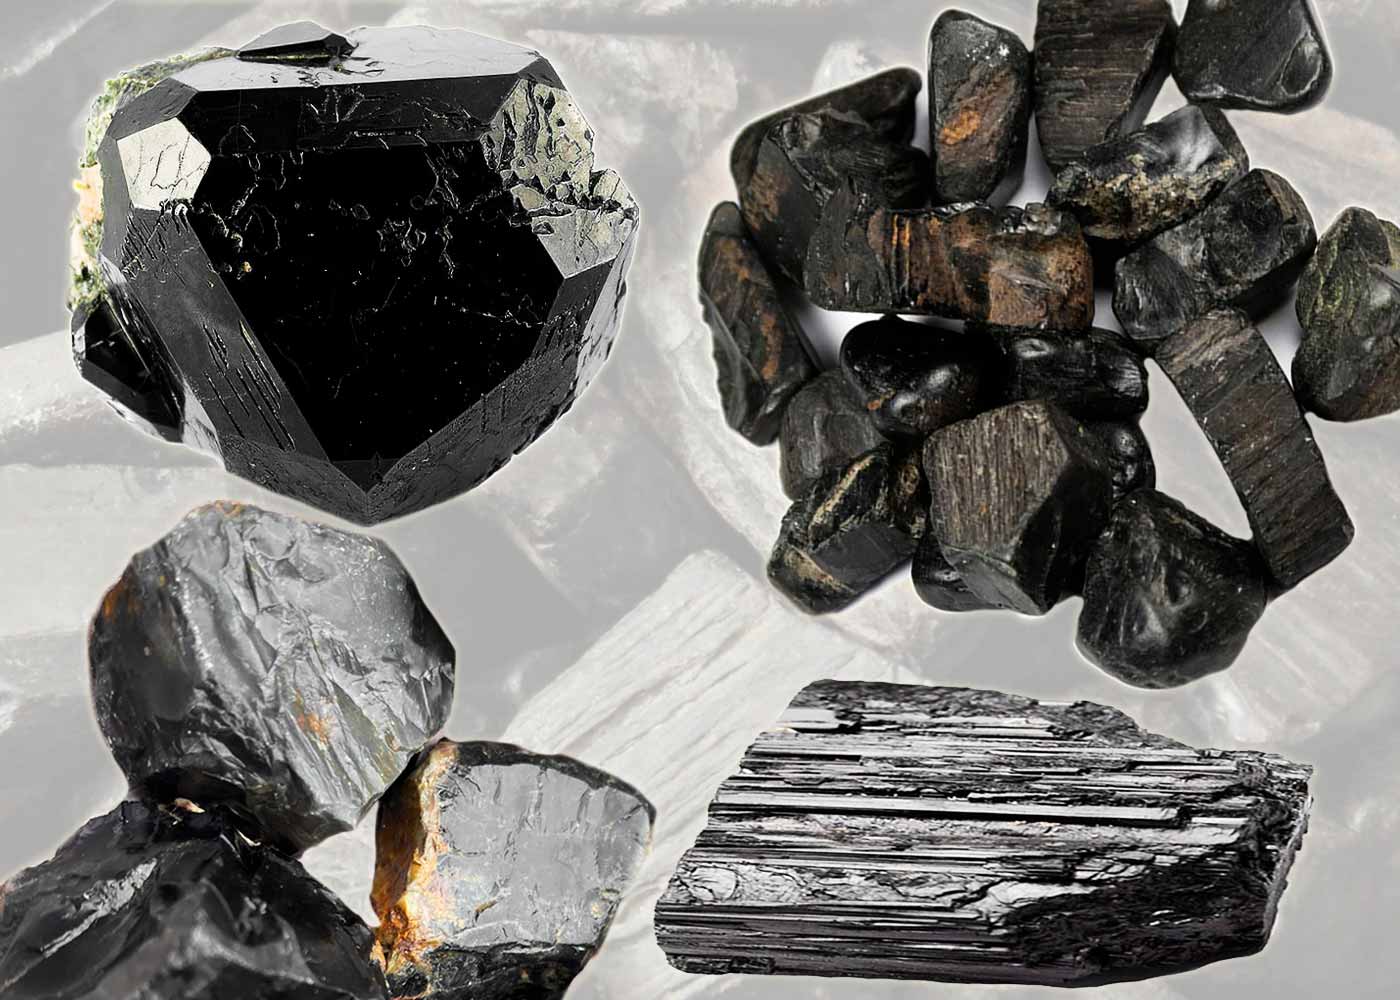 Black stones from Russia